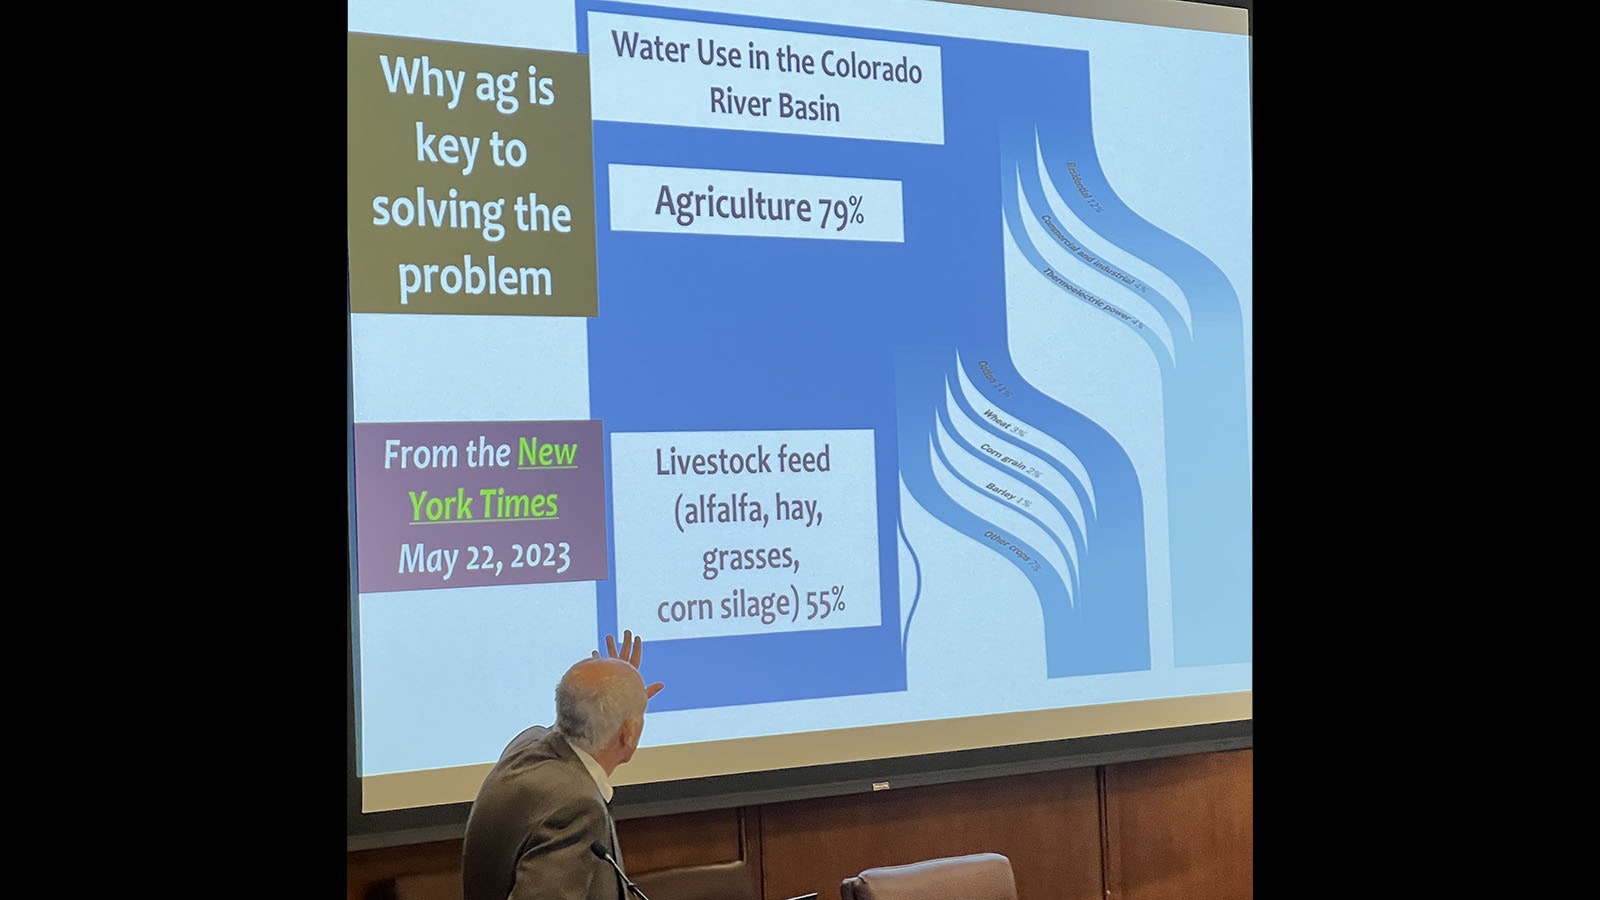 University of Colorado law professor Mark Squillace used this graphic from the New York Times during his talk about the Colorado River, but Wyoming Rancher Pat O’Toole said it was an unfair representation of agricultural water use.